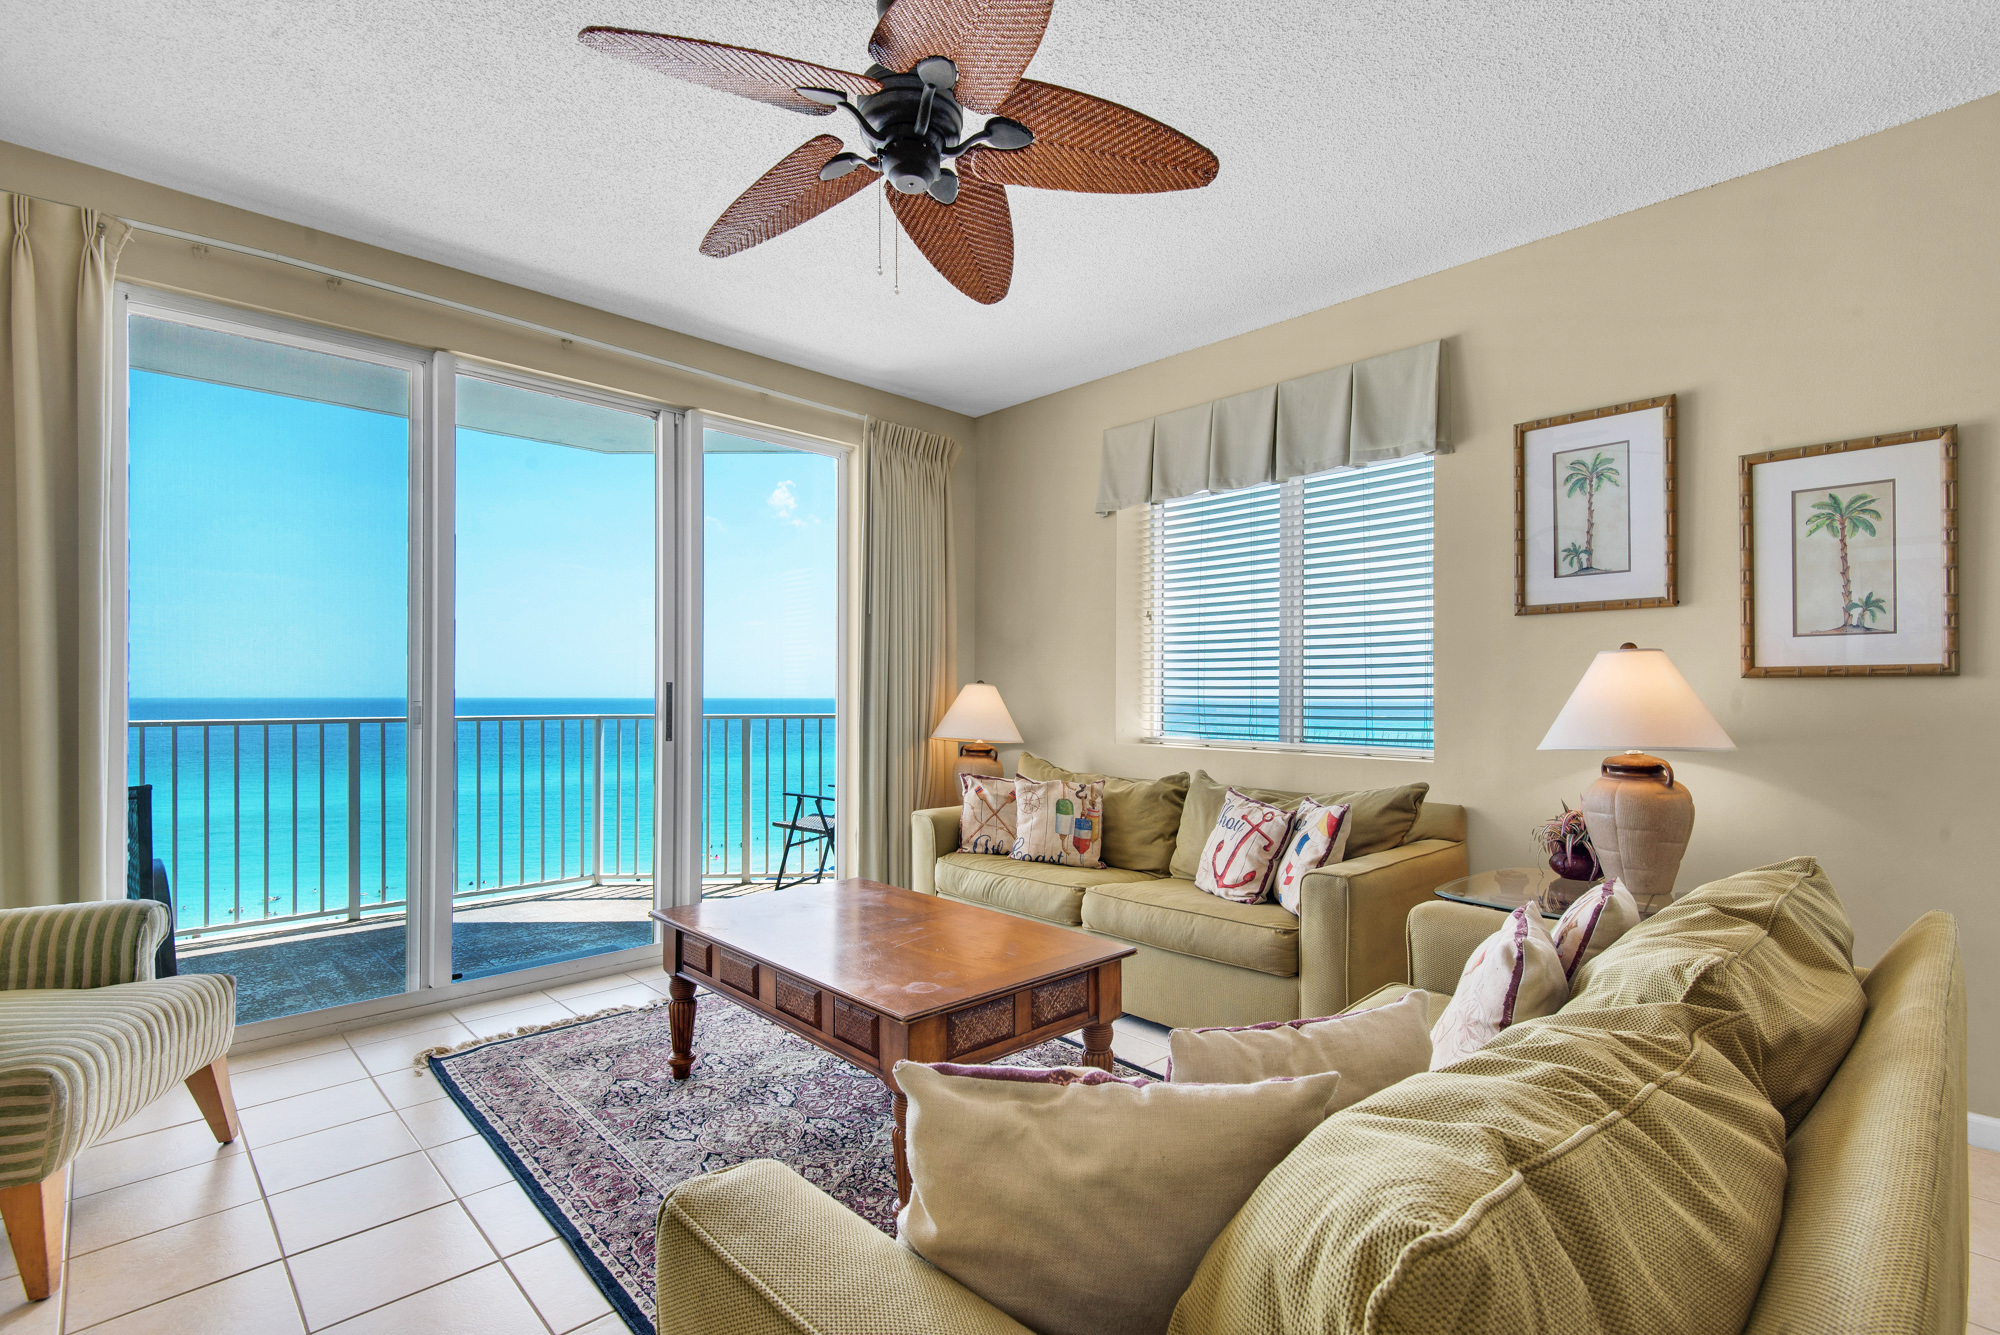 Start planning your next beach vacation with our unbeatable Destin vacation packages and deals at Seascape Resort